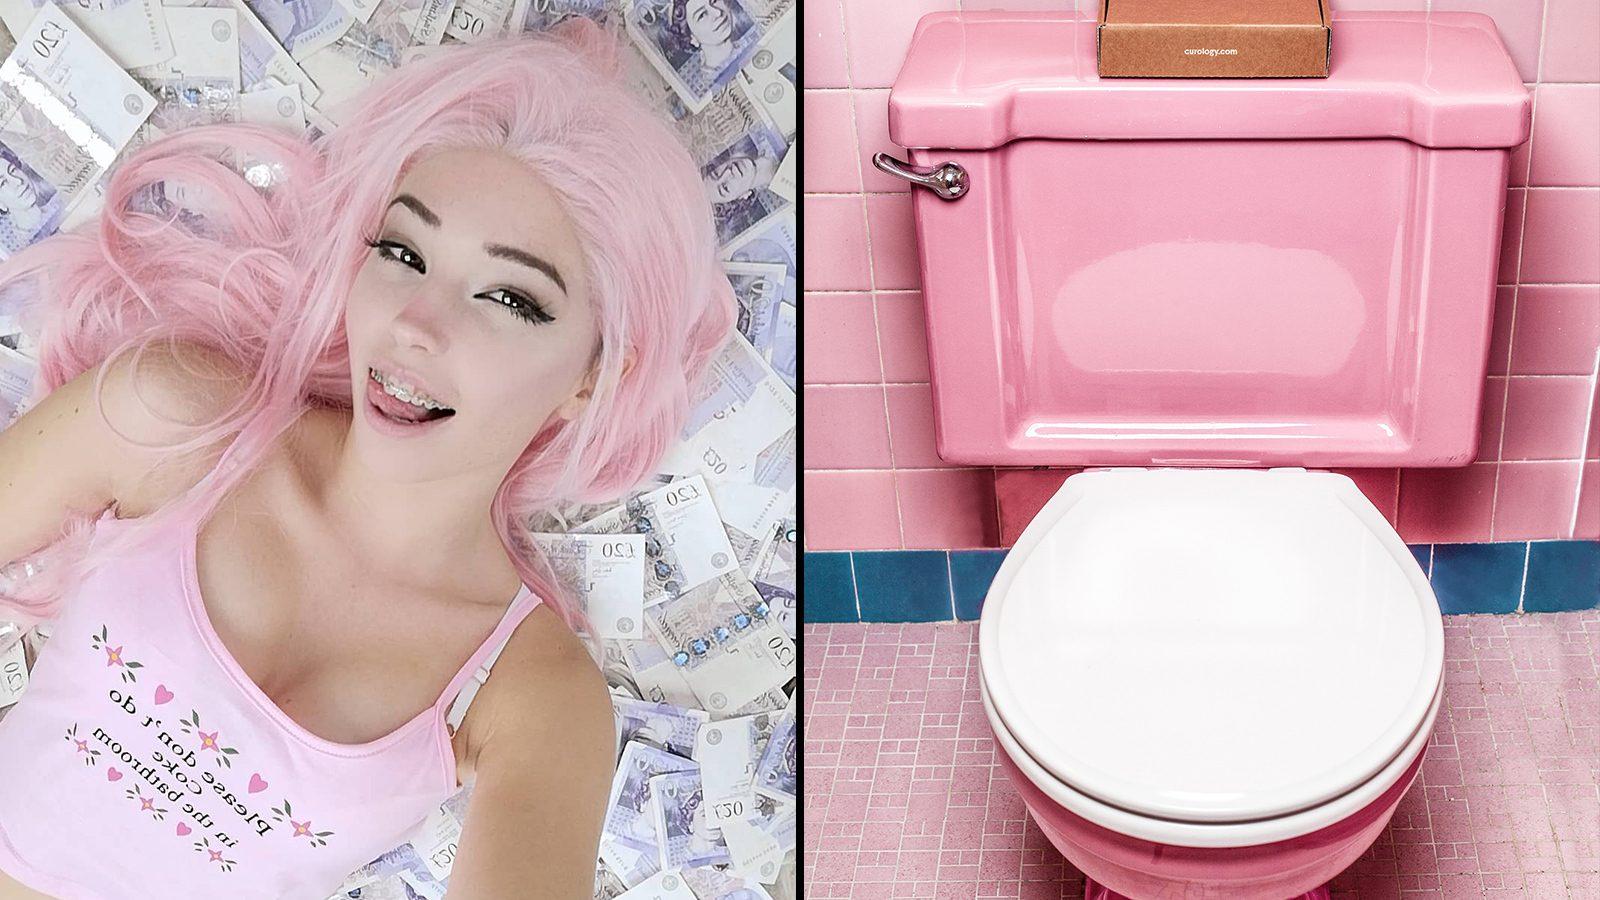 Belle Delphine gained notoriety after selling jars of her bath water - Belle  - PopBuzz